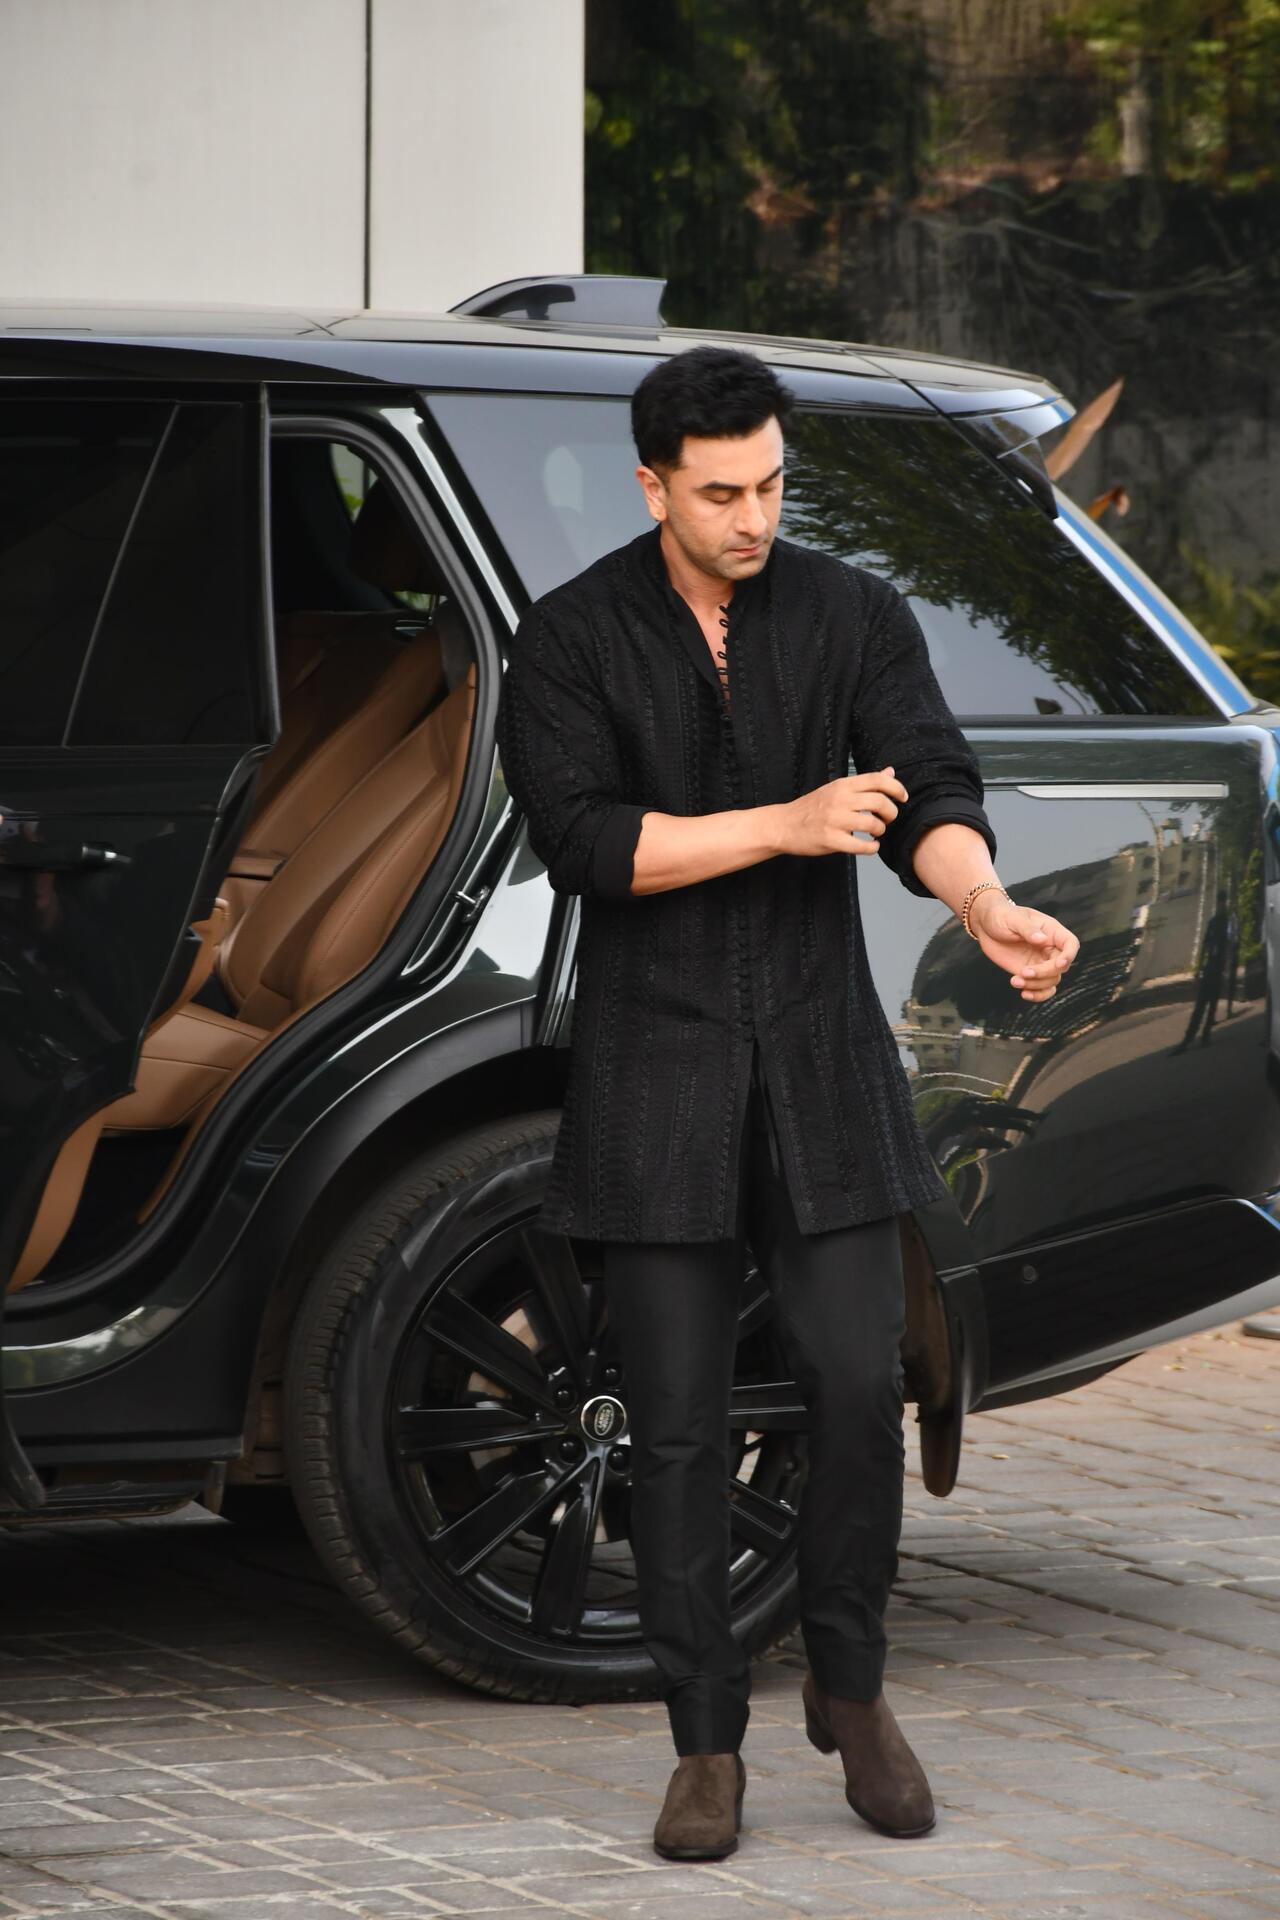 Ranbir Kapoor was spotted in a clean-shaven look and dressed in black ensemble at the Kalina airport